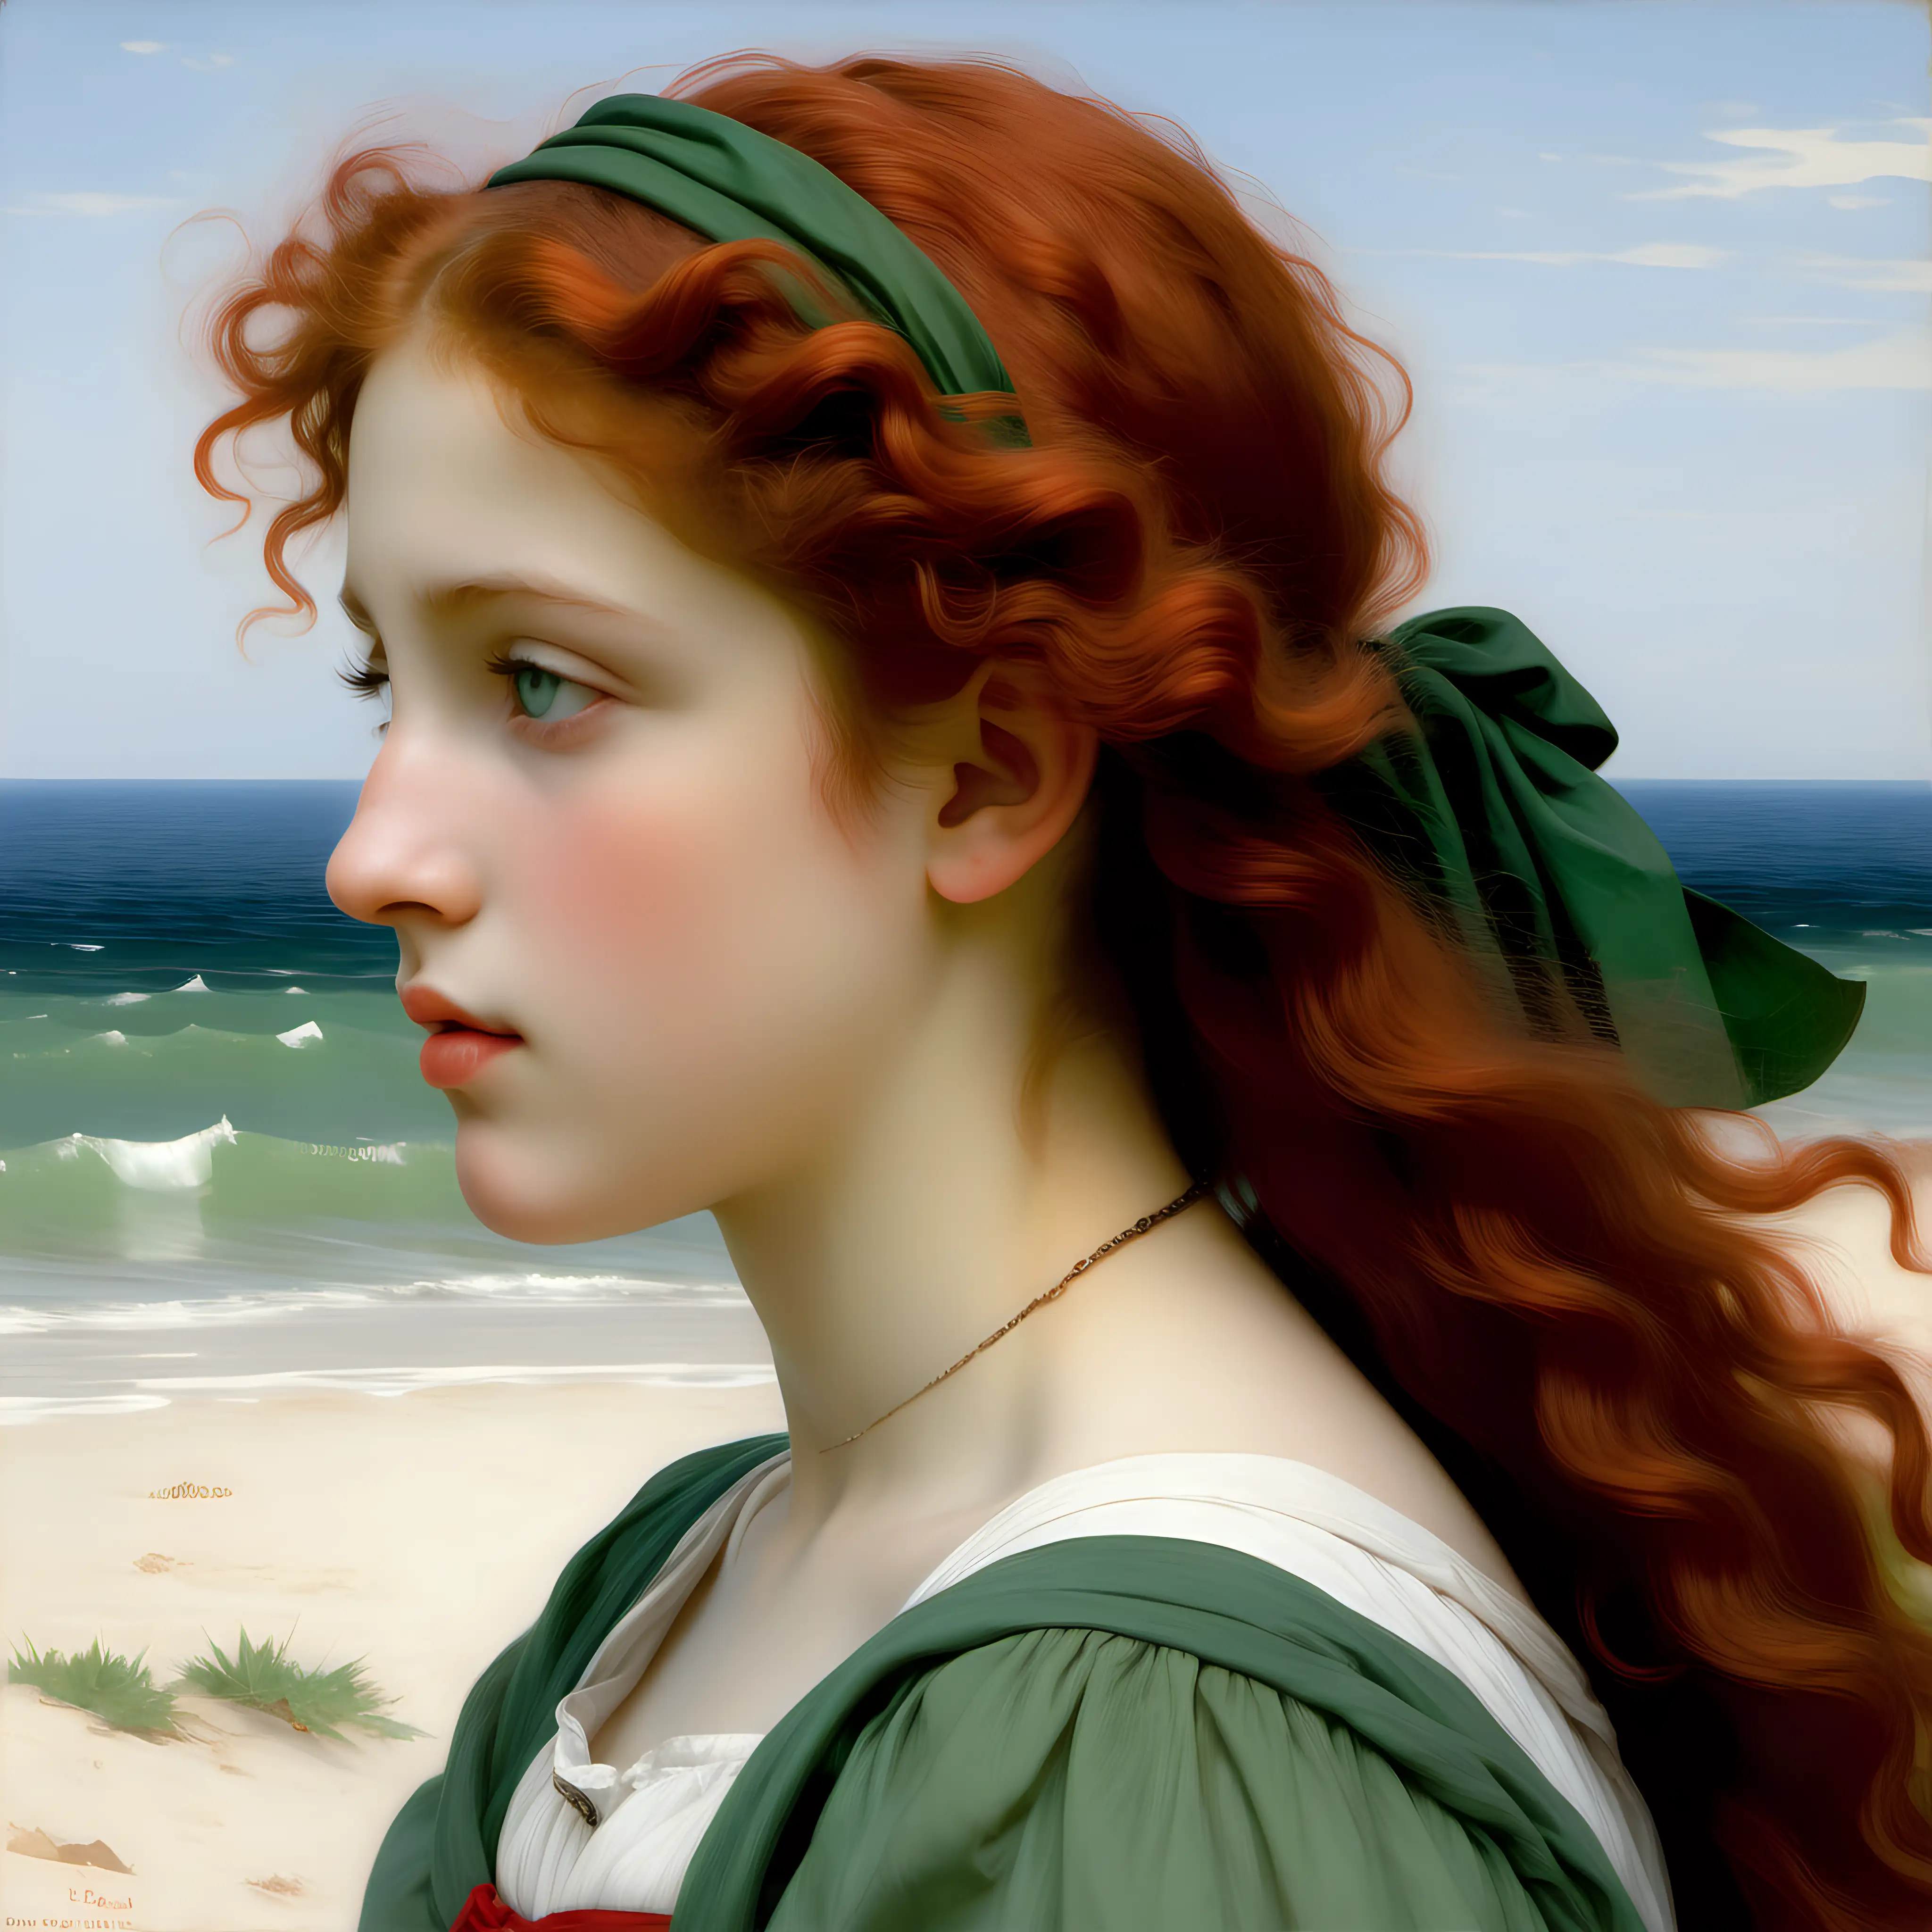 Bouguereau Portrait Stunning GreenEyed Girl with Red Hair at Beach